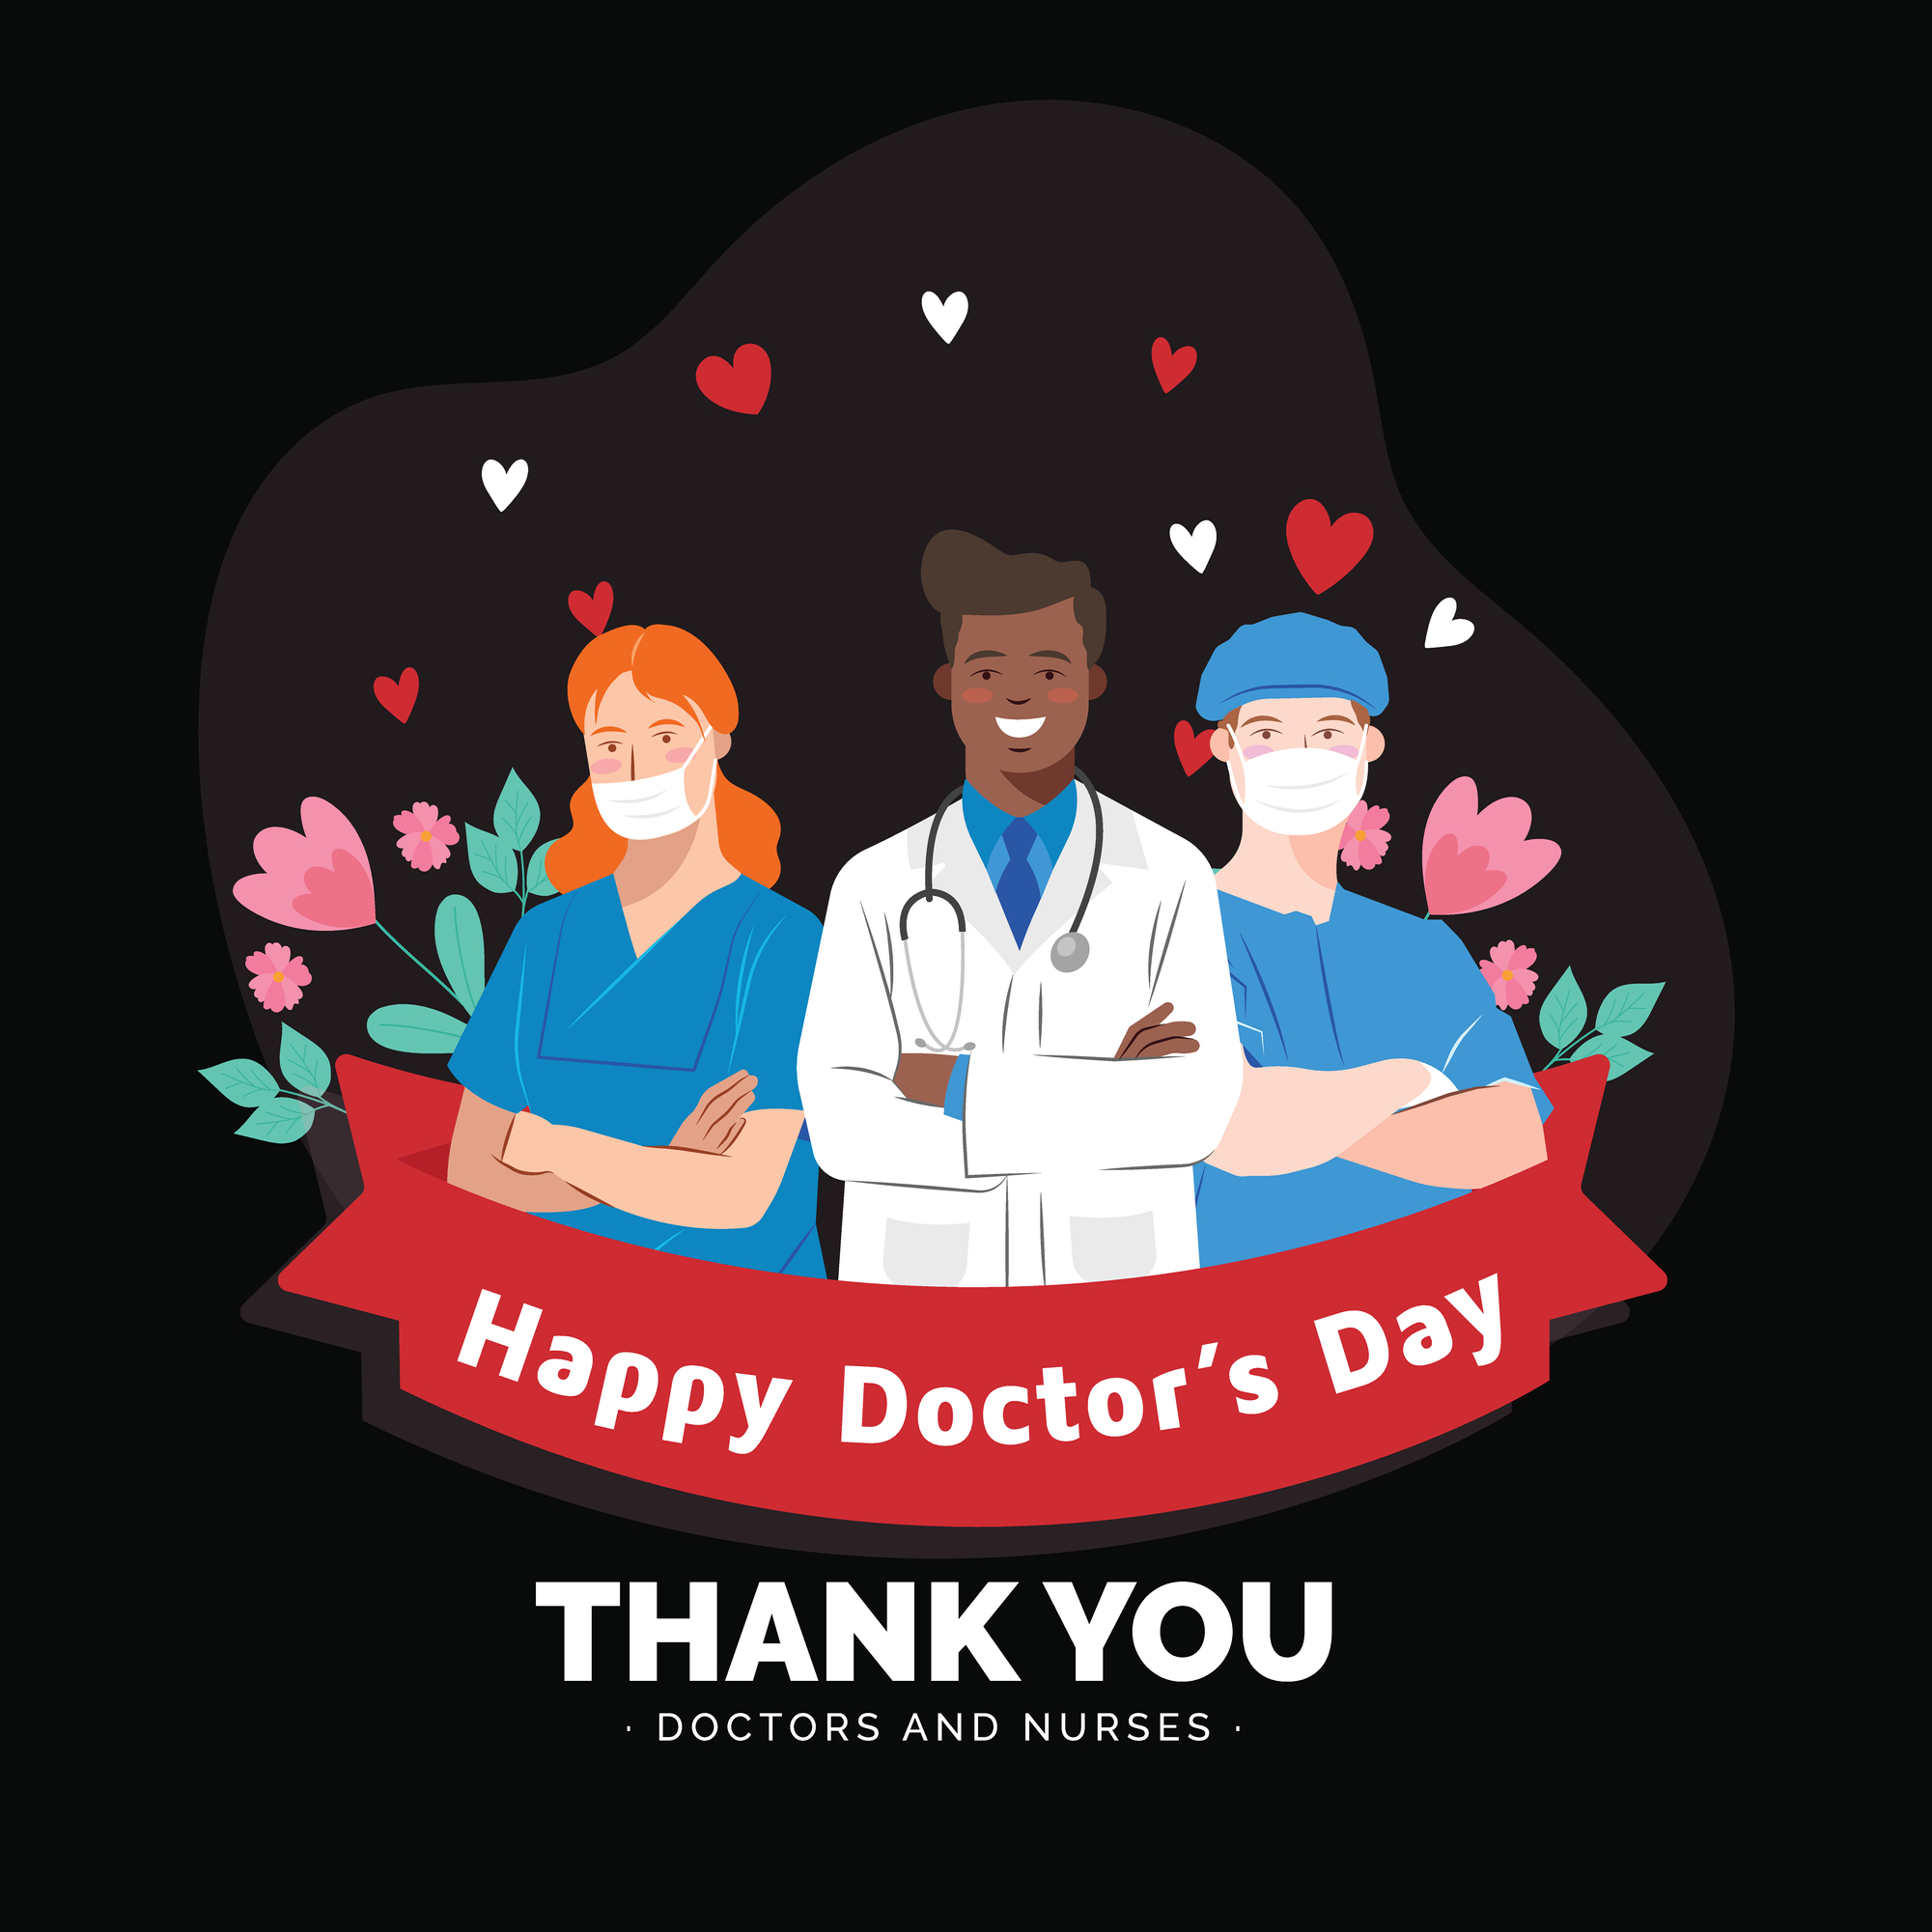 Happy Doctors’ Day 2022 Wishes, Images, Greetings, Quotes, Messages